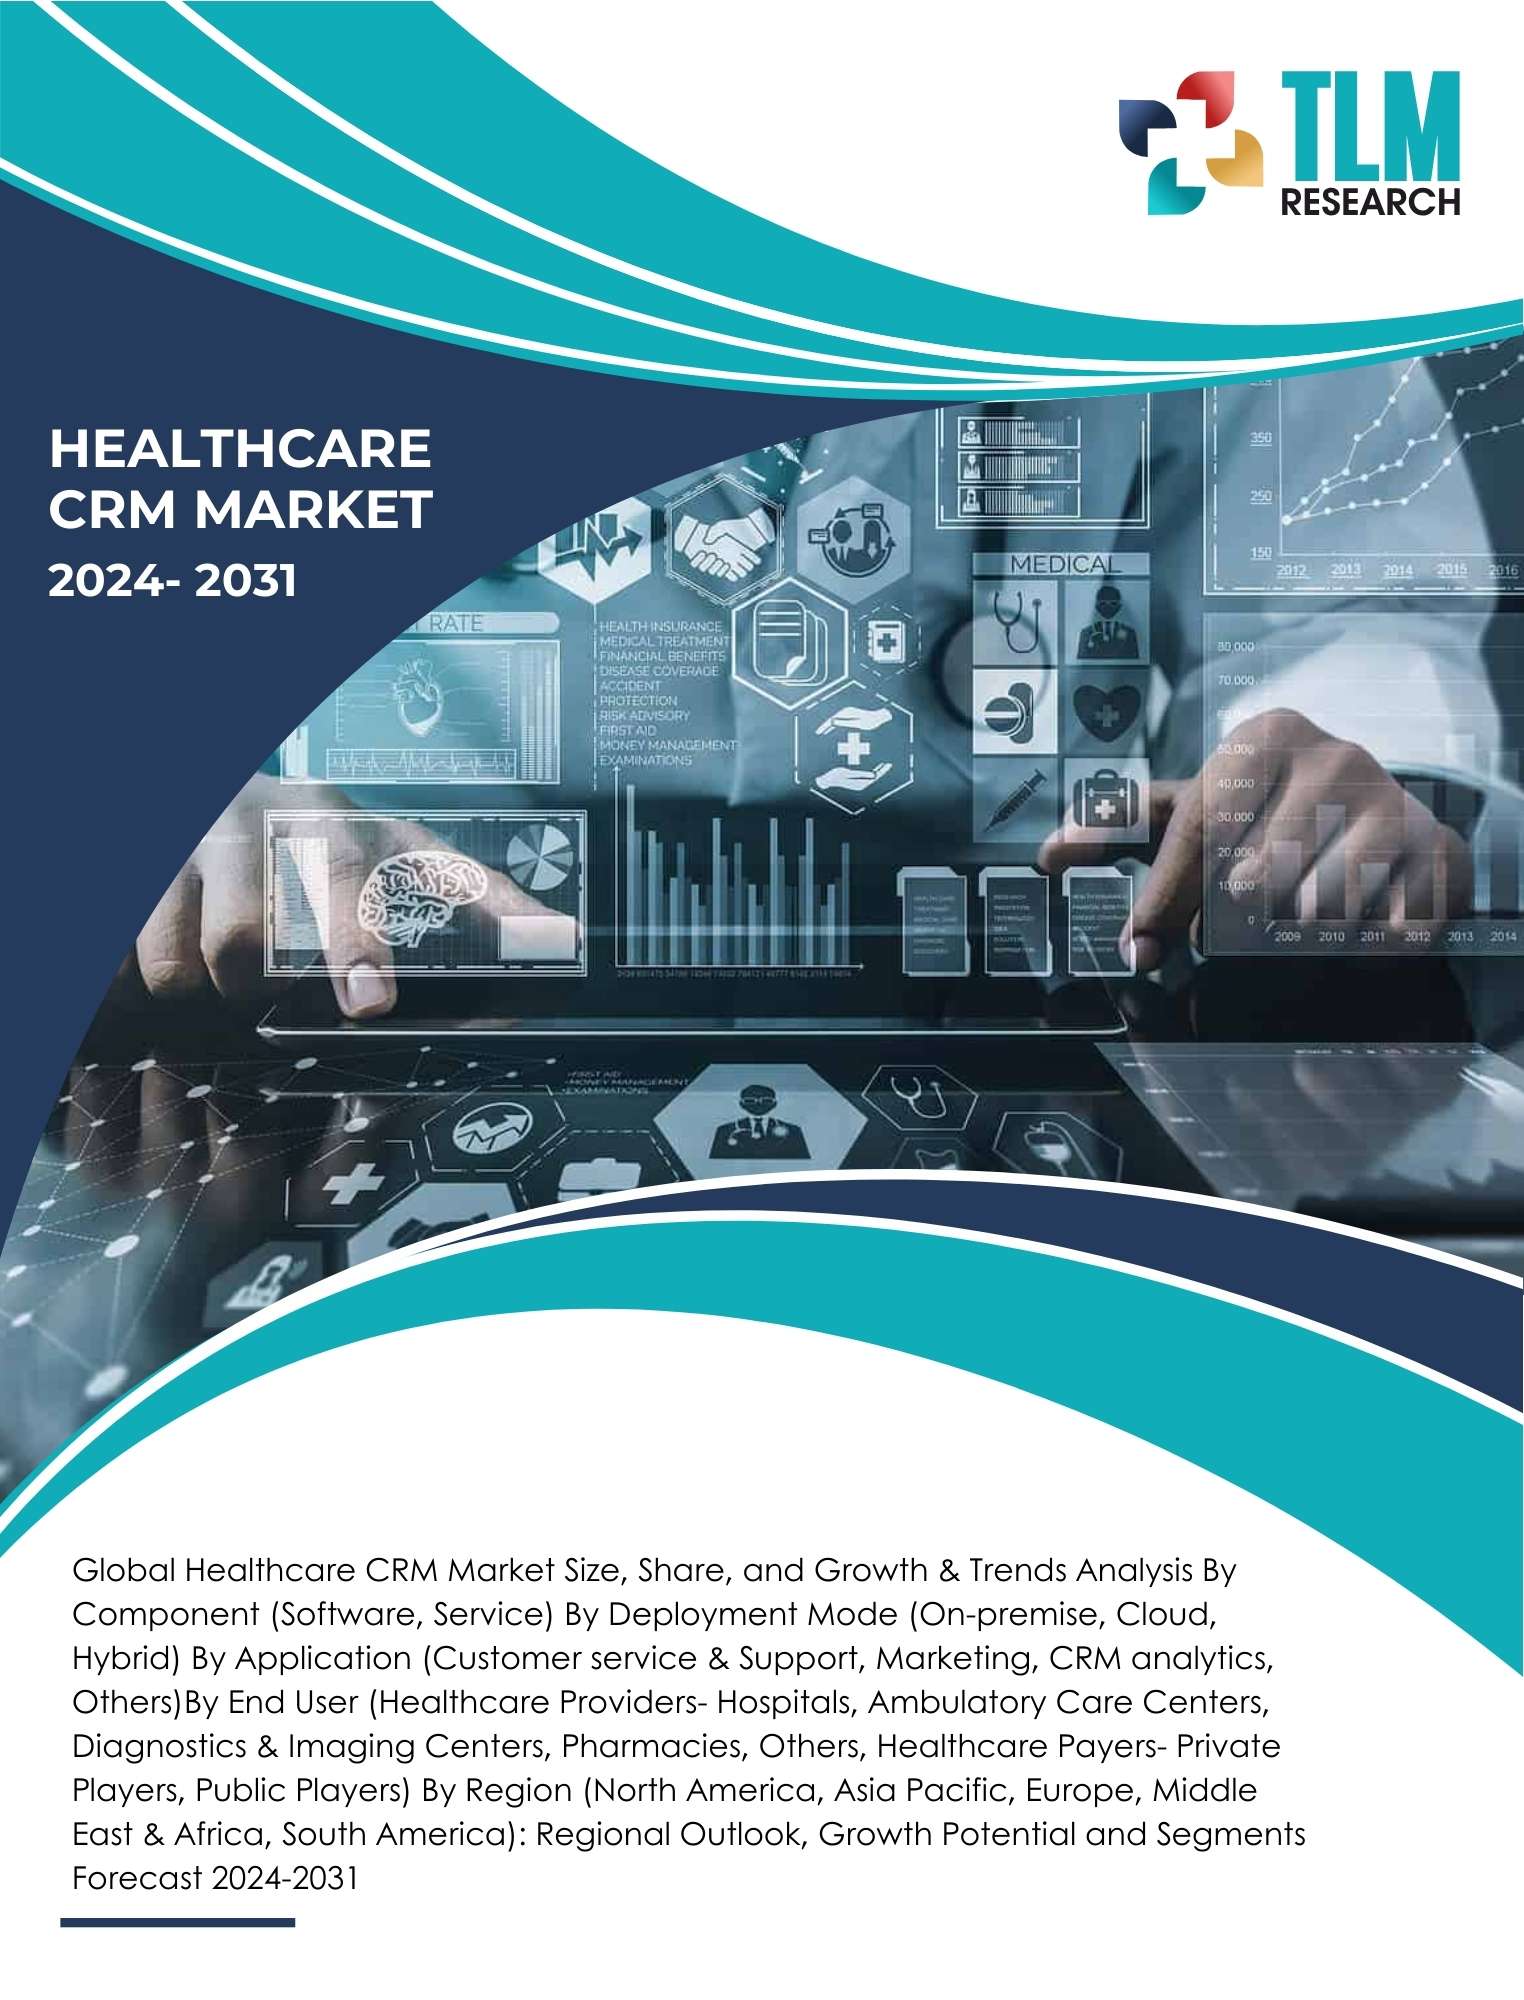 Healthcare CRM Market: Global Industry Analysis and Forecast | 2031 | TLM Research